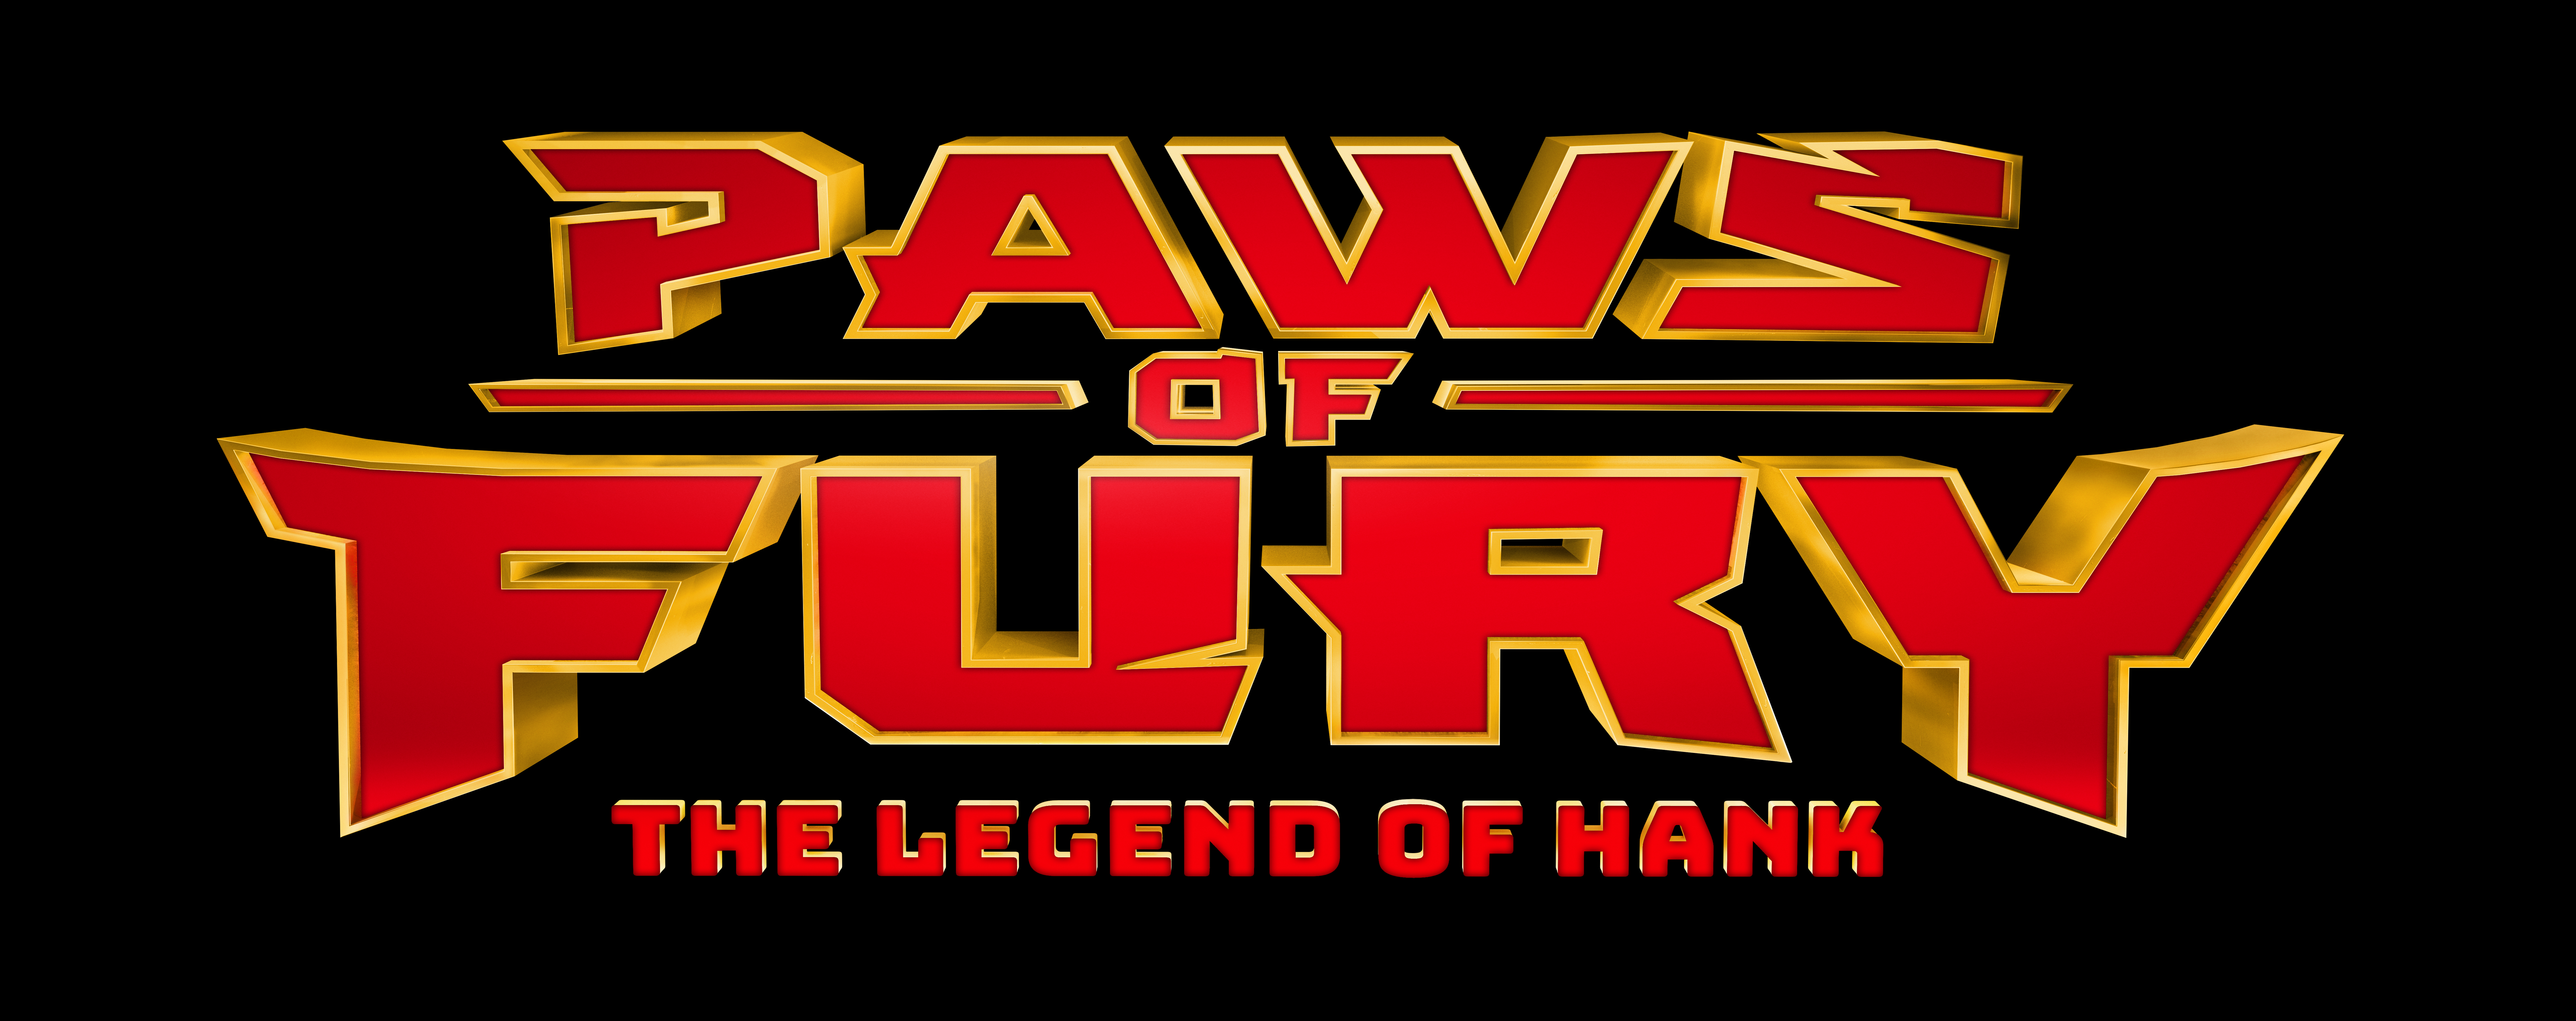 #FIRSTLOOK: “PAWS OF FURY: THE LEGEND OF HANK” TRAILER